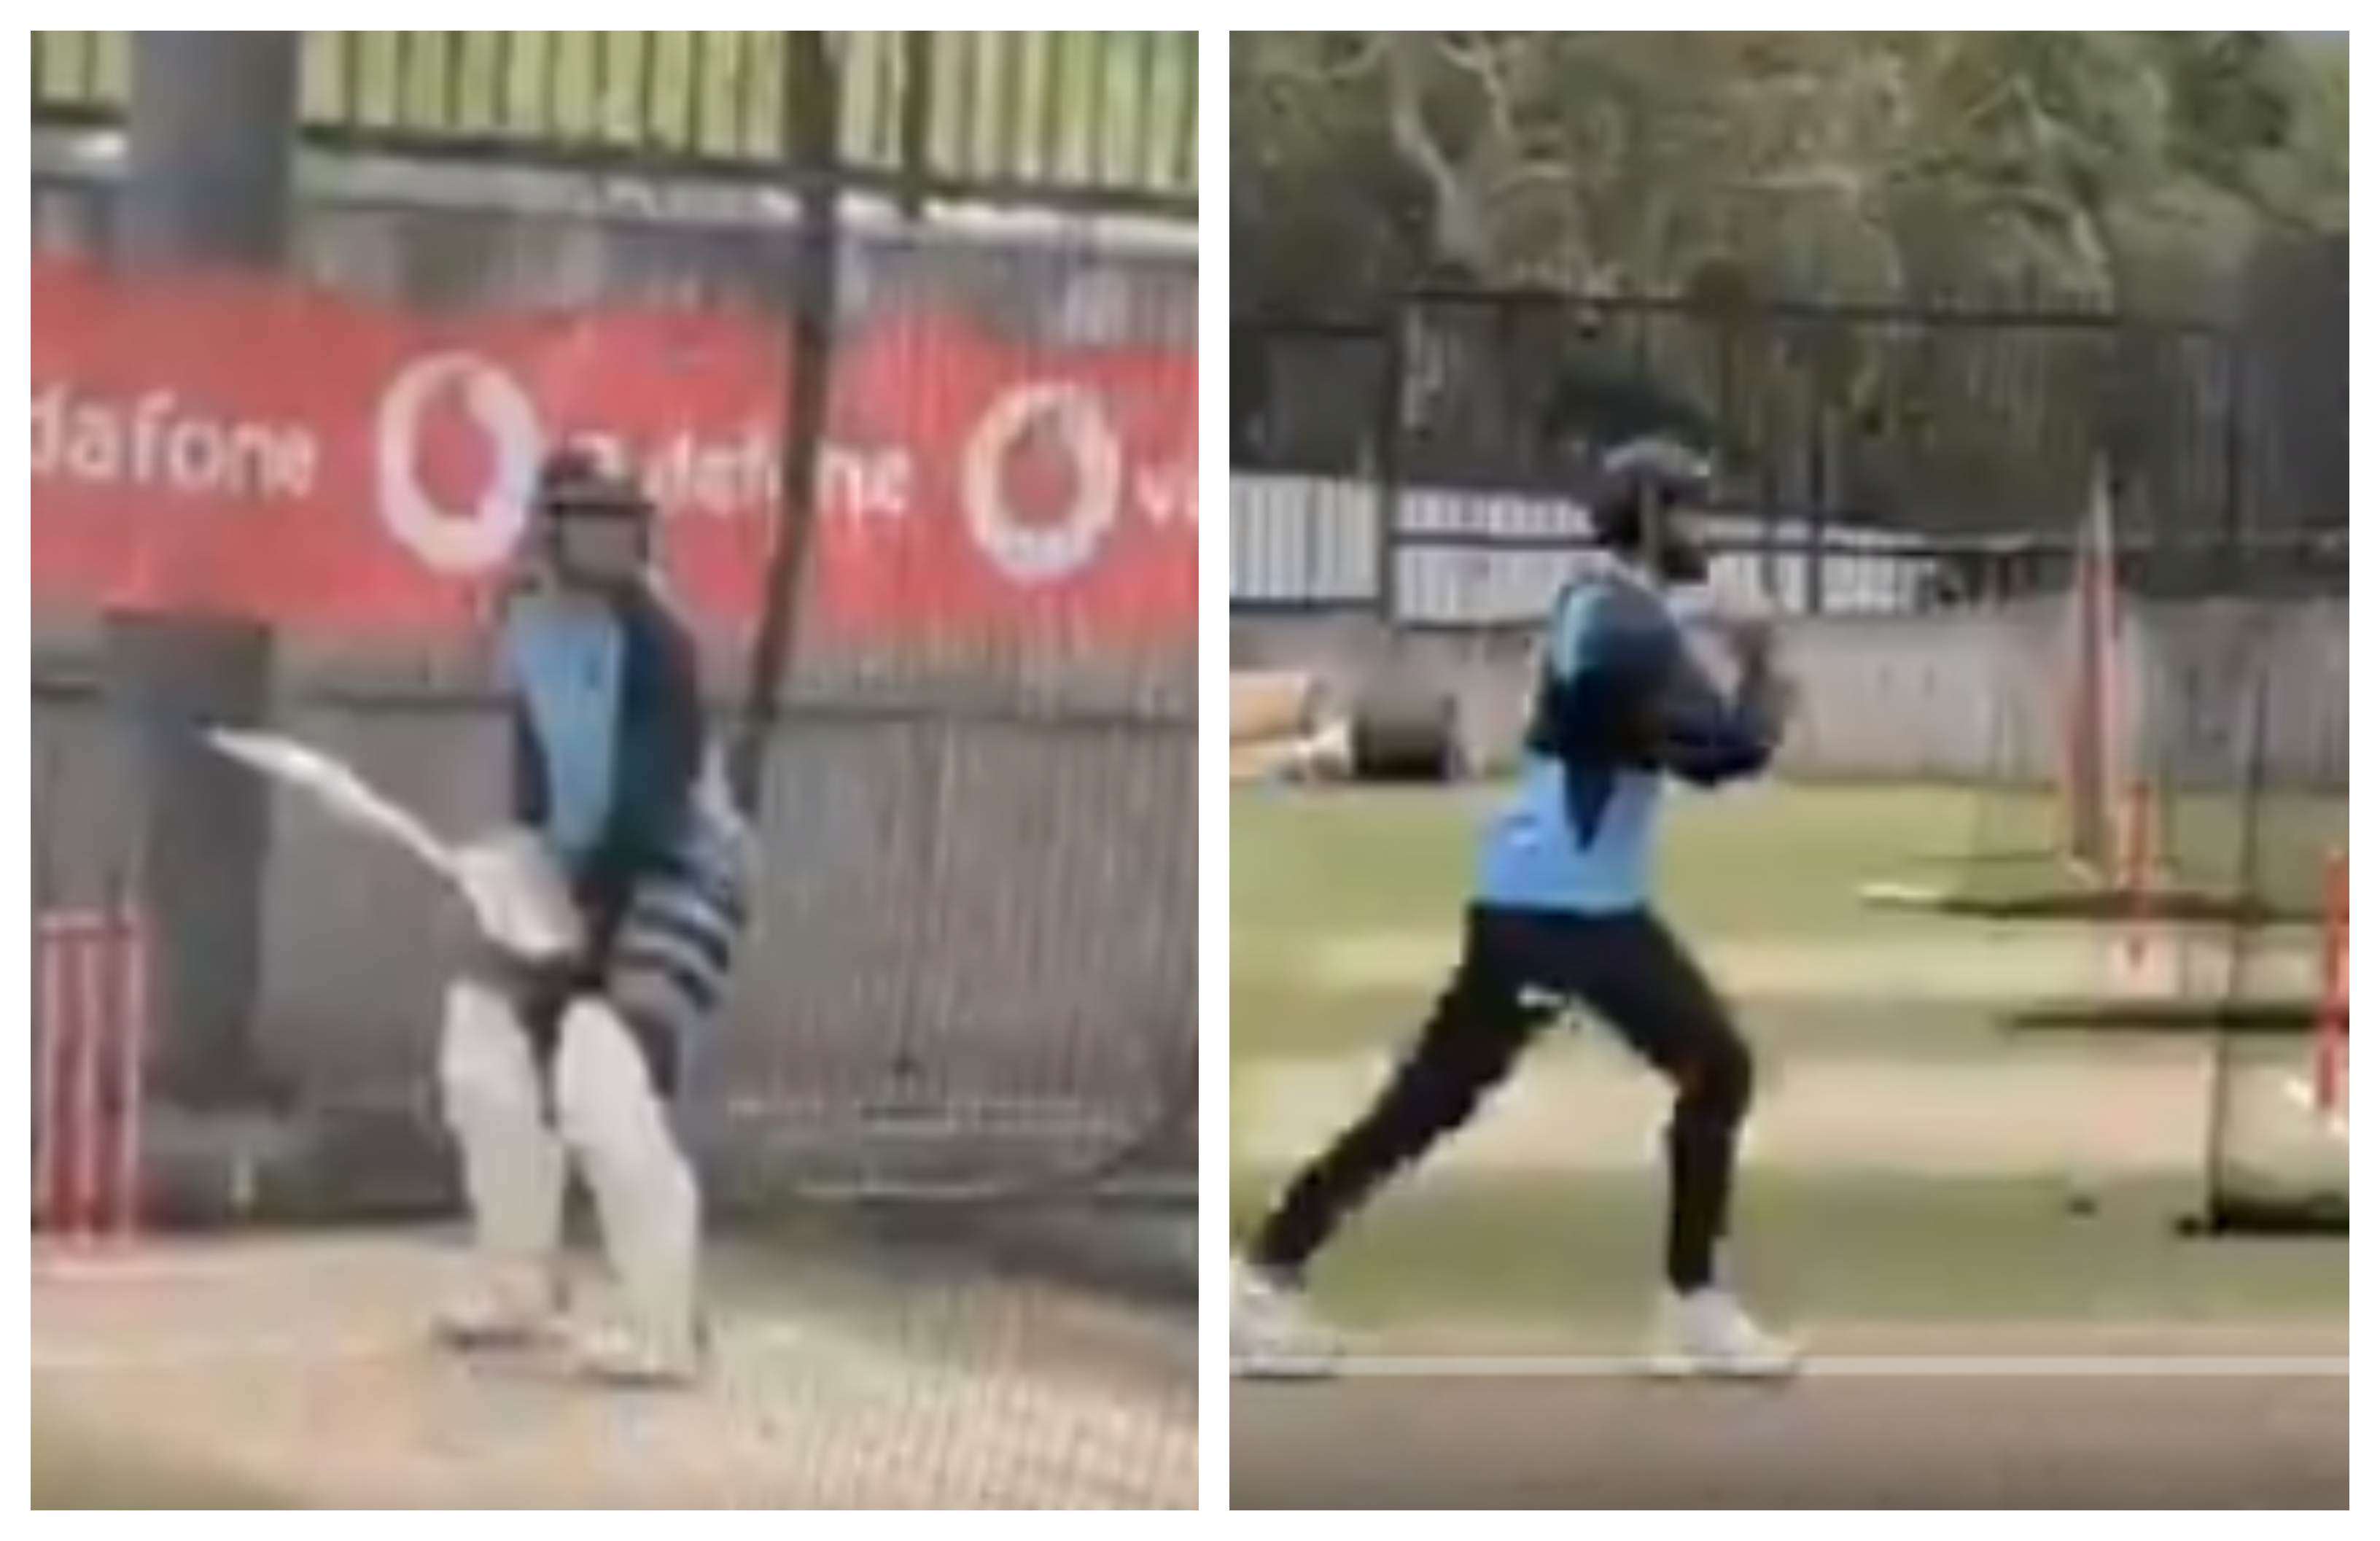 Gill and Jadeja sweat it out at the nets | Screengrab